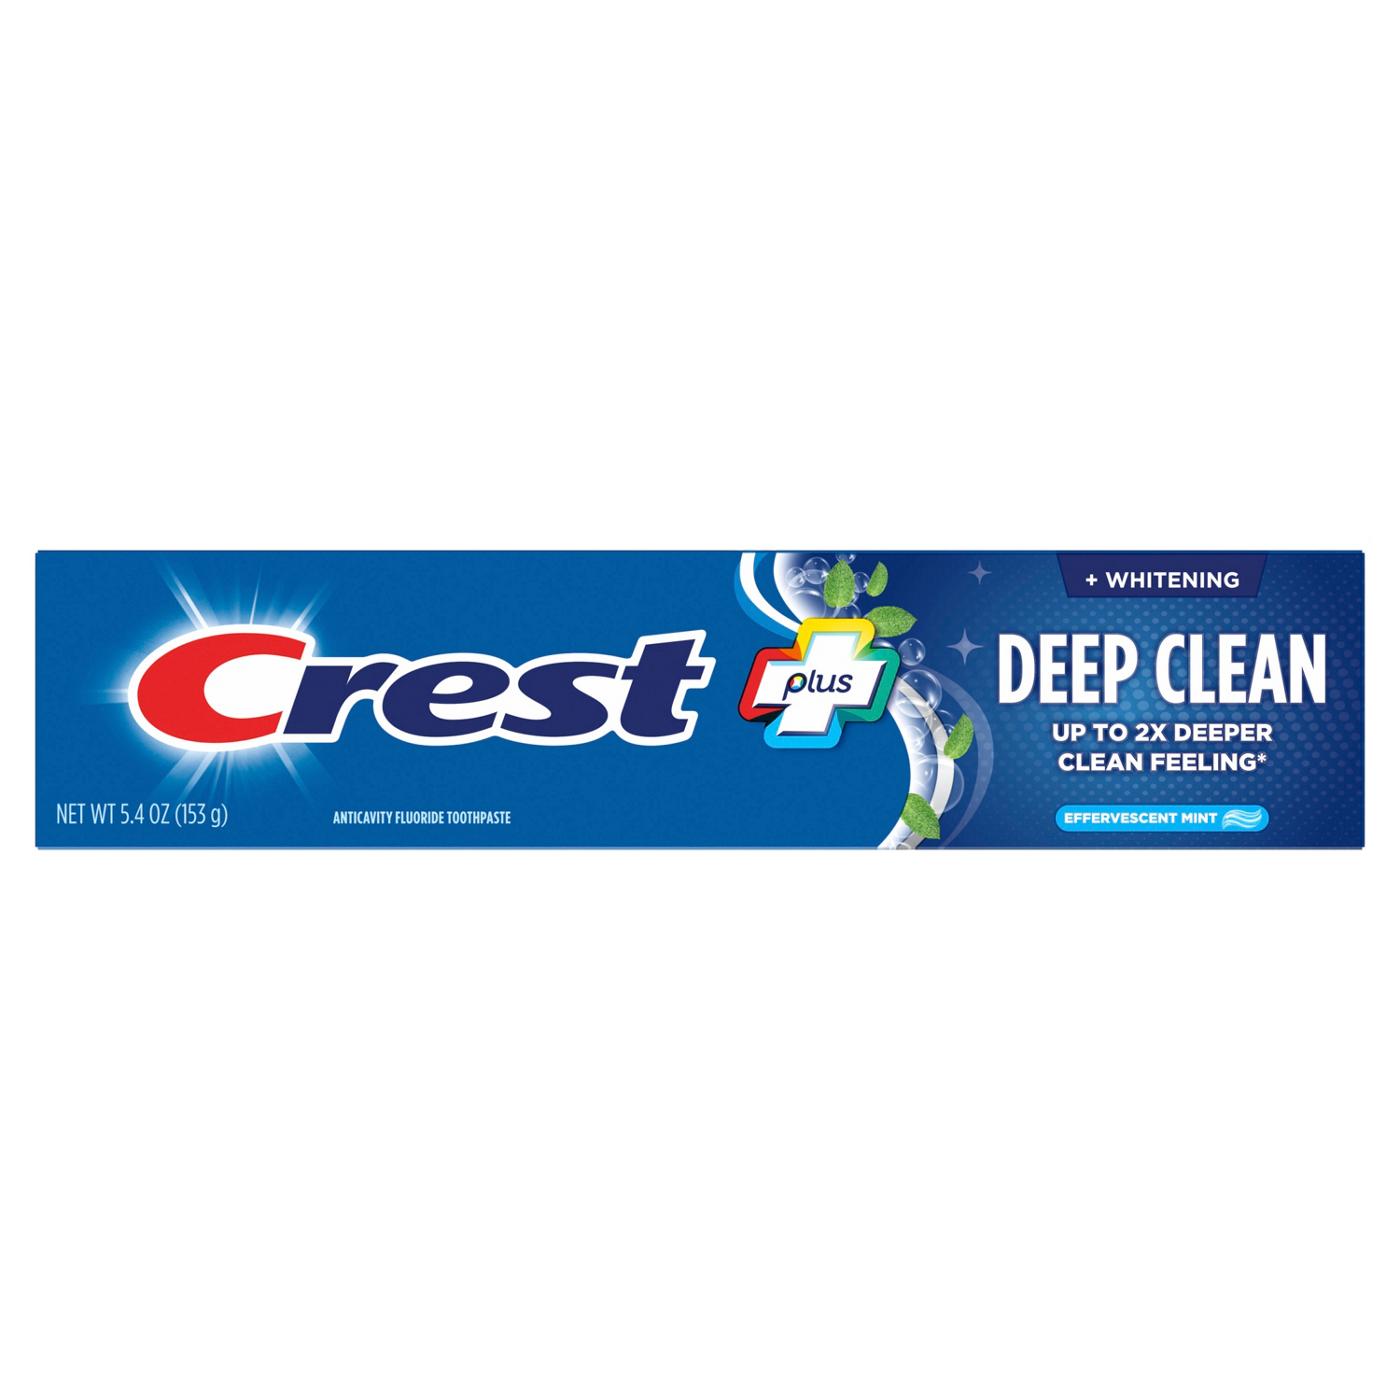 Crest Complete + Deep Clean Whitening Toothpaste - Effervescent Mint; image 1 of 10